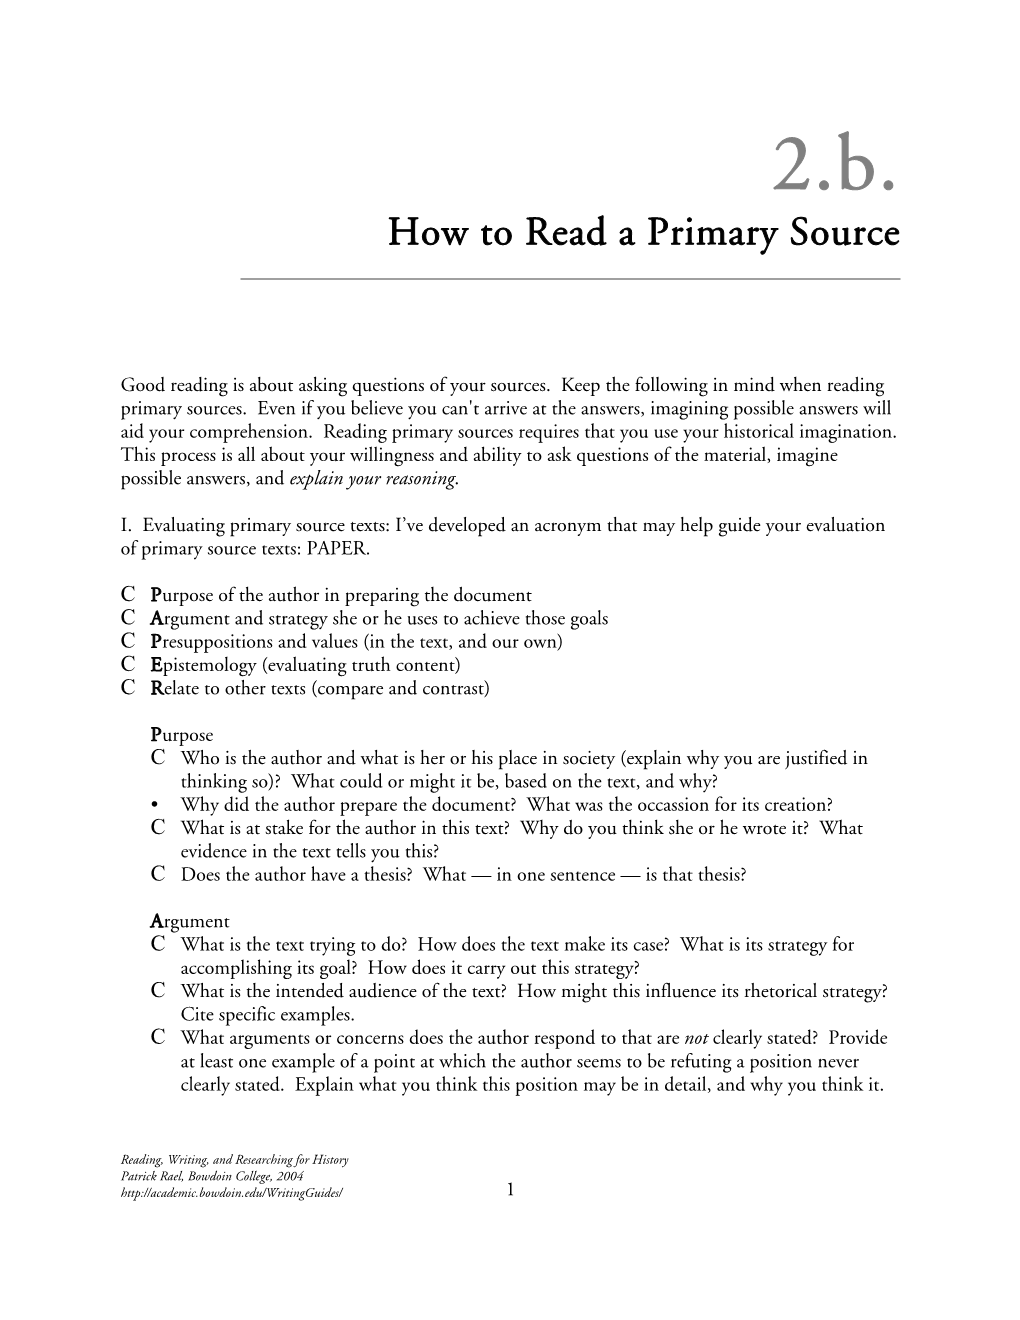 How to Read a Primary Source